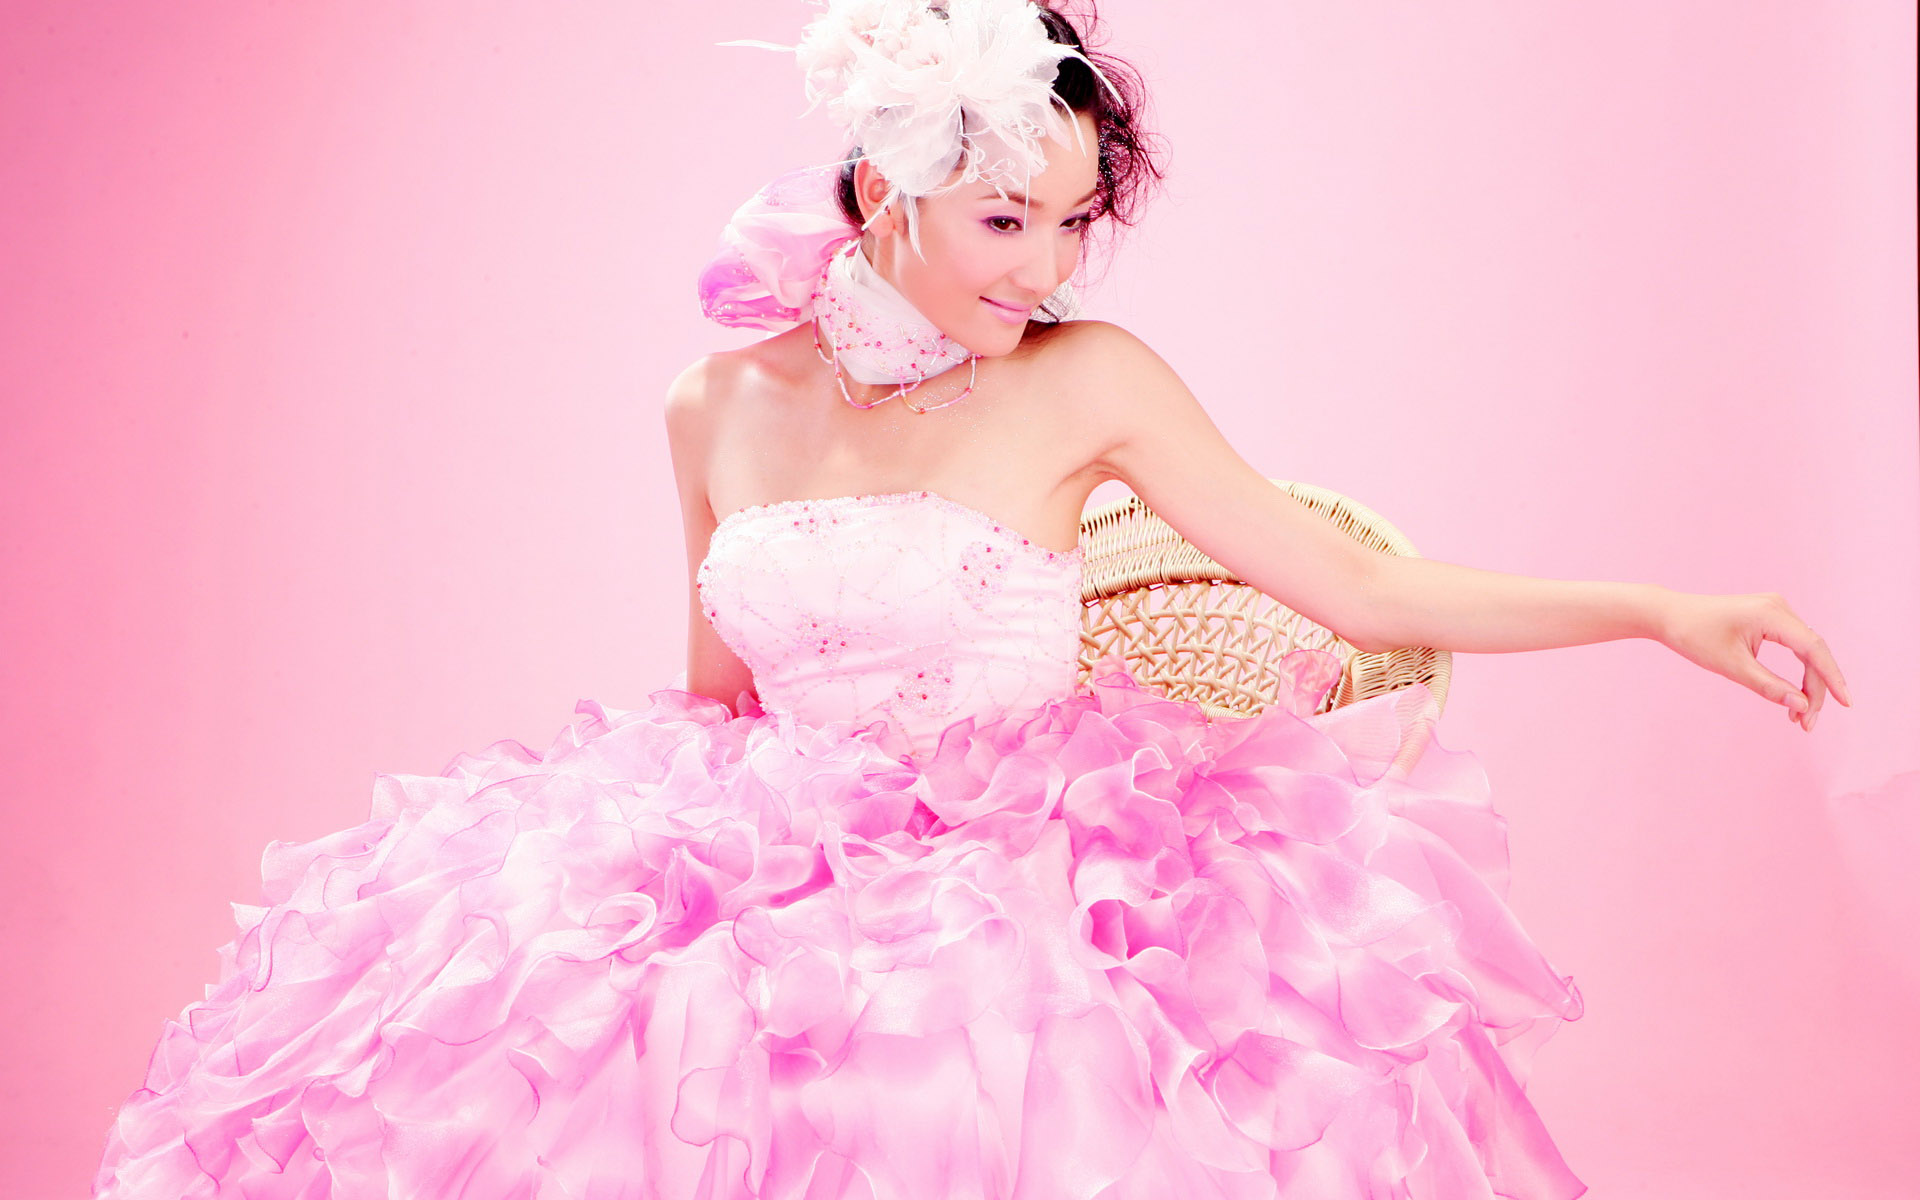 fashion-pinky-wedding-gown-backgrounds-for-powerpoint.jpg